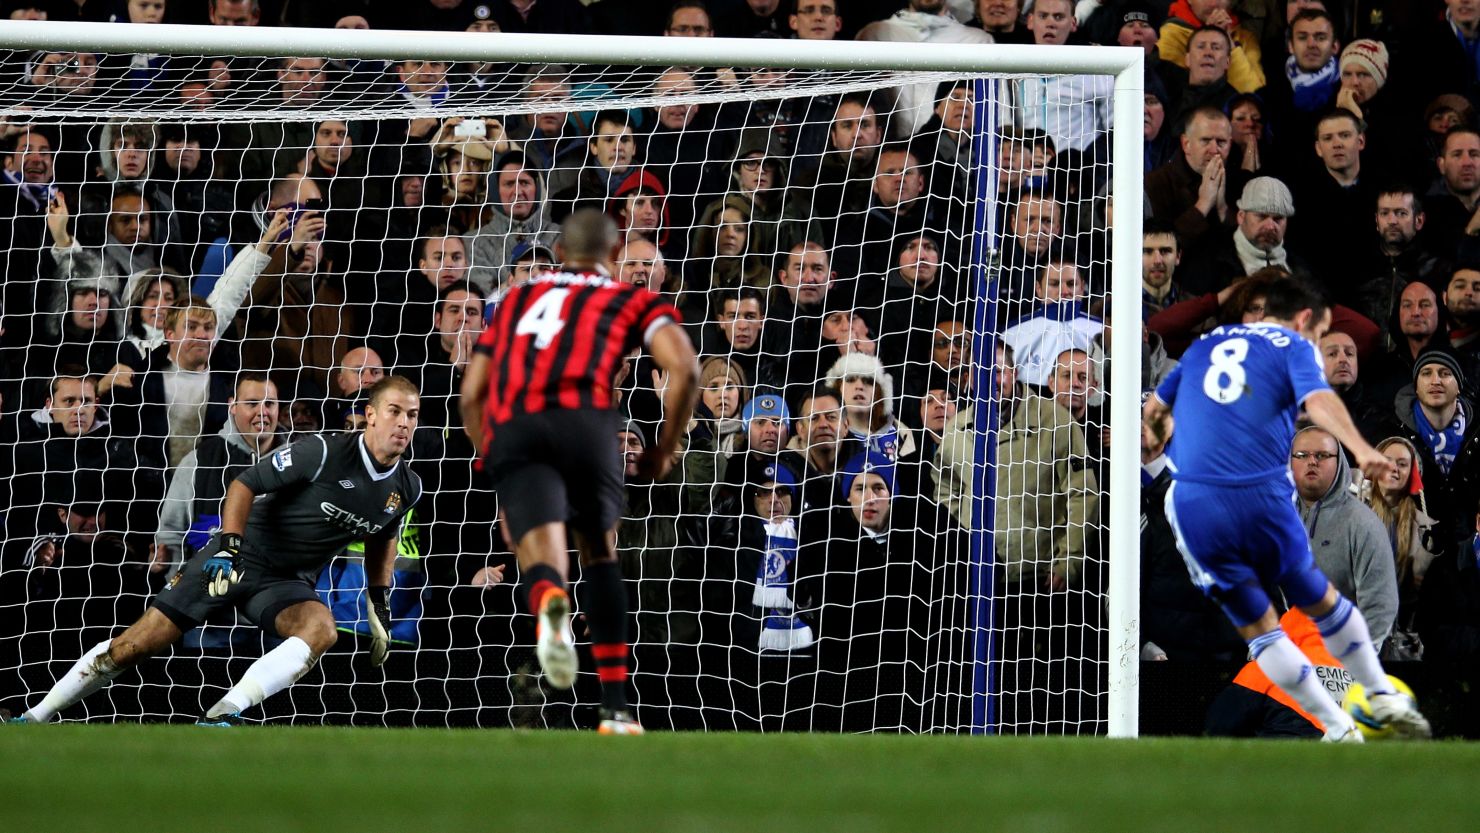 Frank Lampard scores Chelsea's late winner against Manchester City from the penalty spot at Stamford Bridge. 